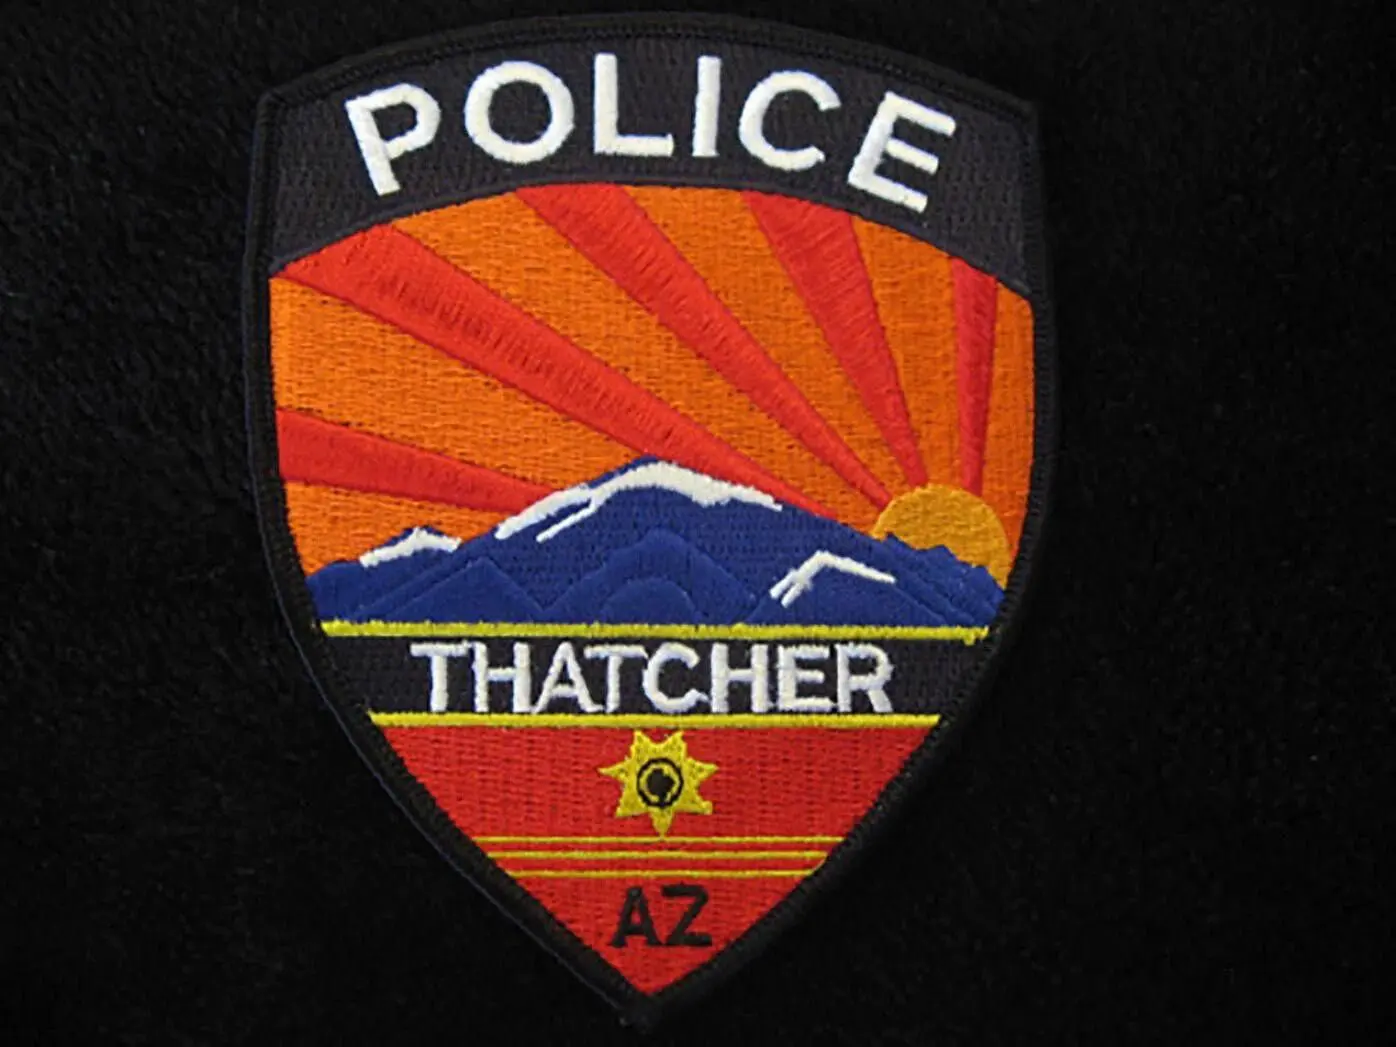 A patch of the police department that is in thatcher.